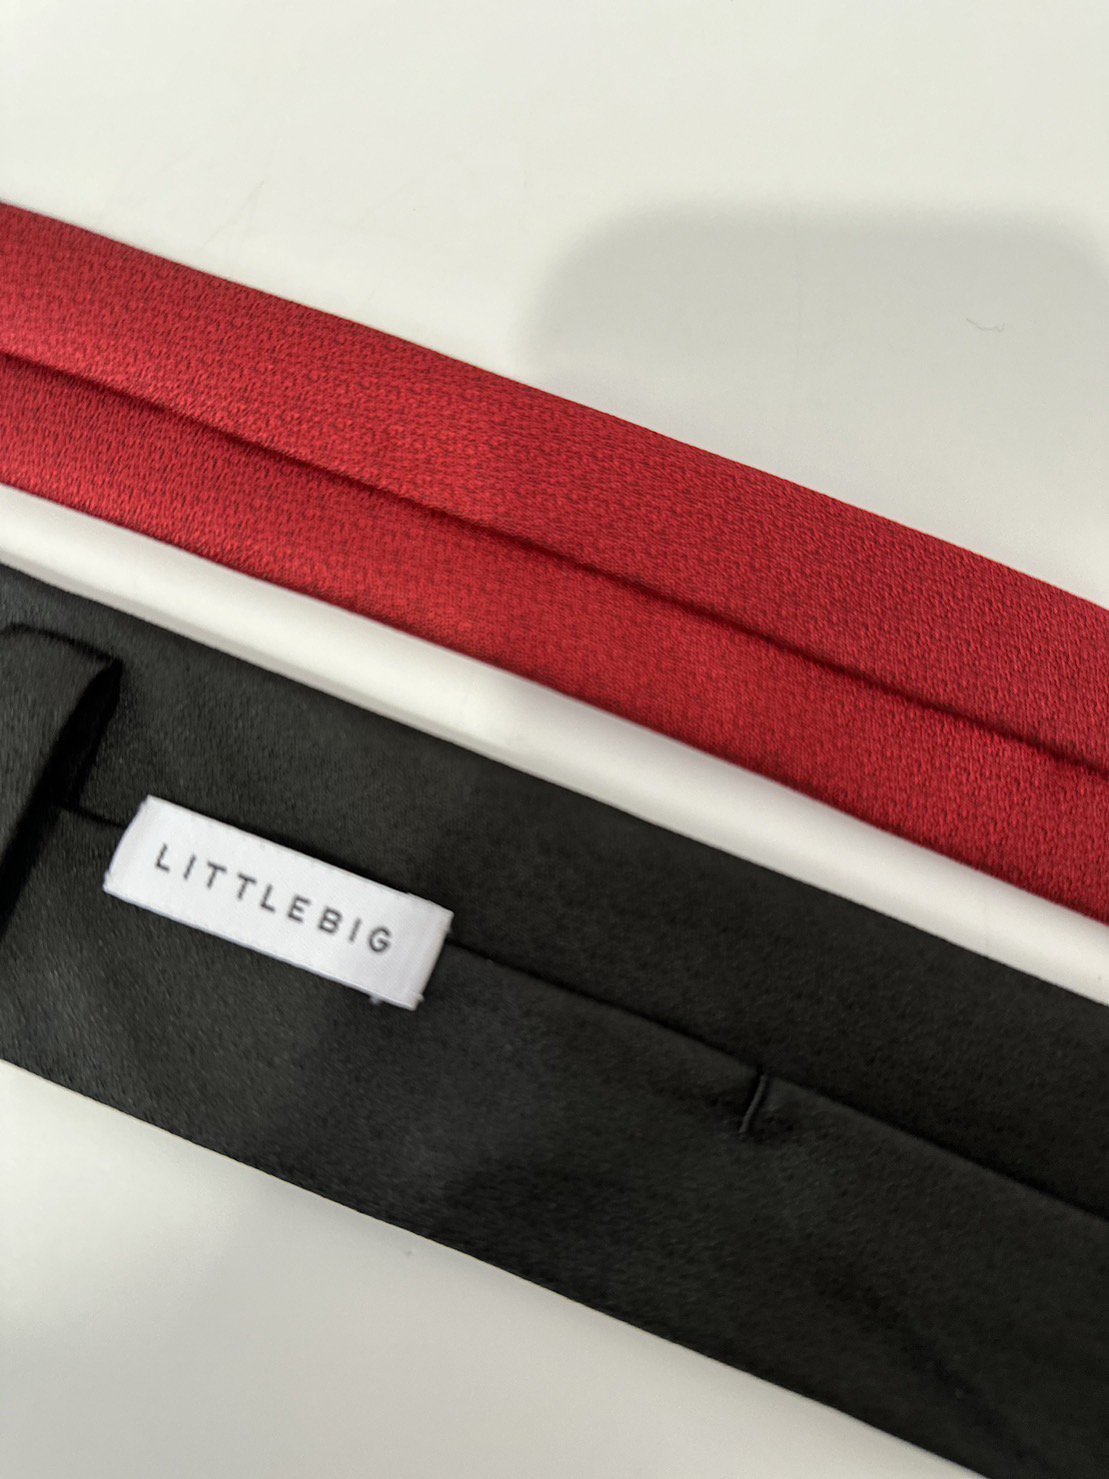 LITTLEBIG<br />2Tone Narrow Tie / Black&Red<img class='new_mark_img2' src='https://img.shop-pro.jp/img/new/icons14.gif' style='border:none;display:inline;margin:0px;padding:0px;width:auto;' />